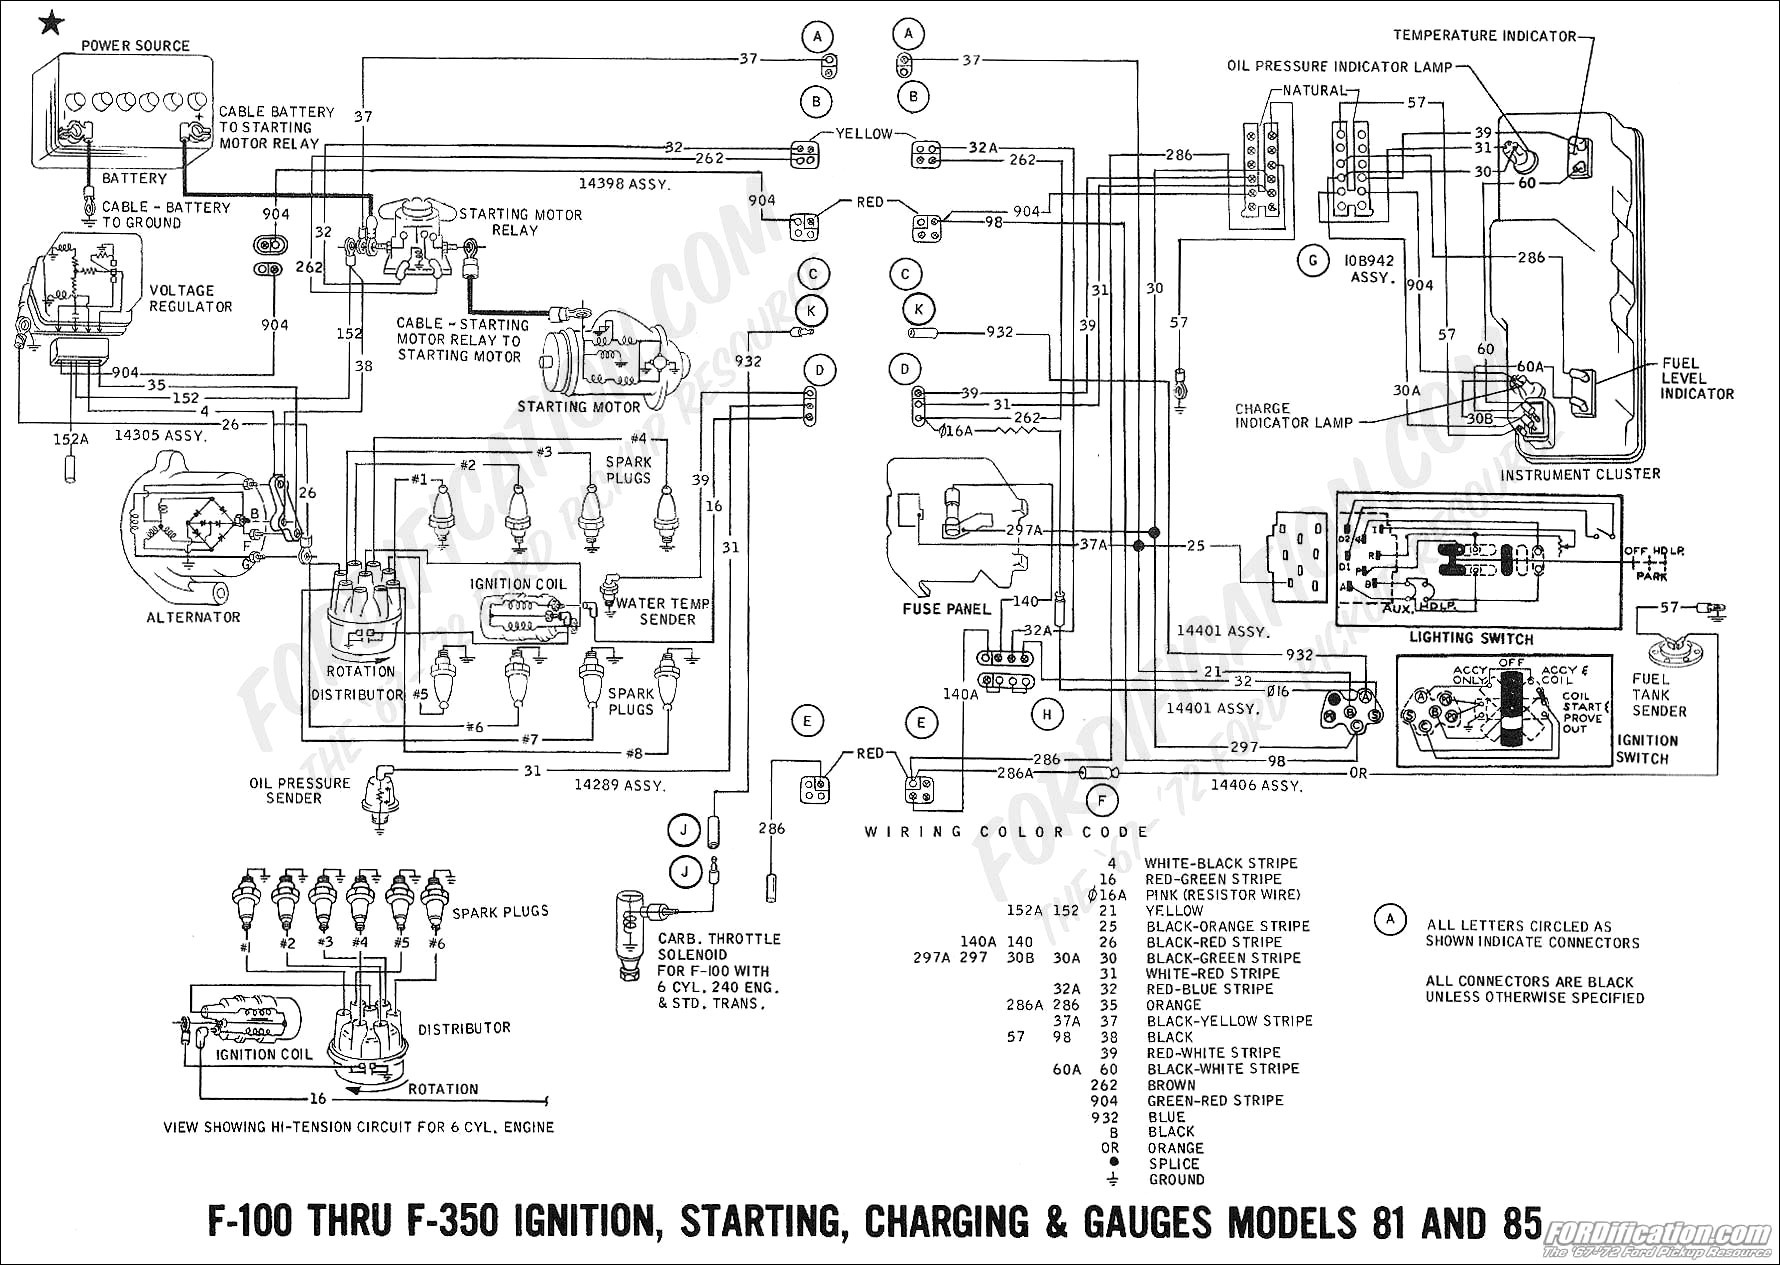 Truck Wiring Diagrams Free ford Truck Wiring Diagrams Free sources Of Truck Wiring Diagrams Free